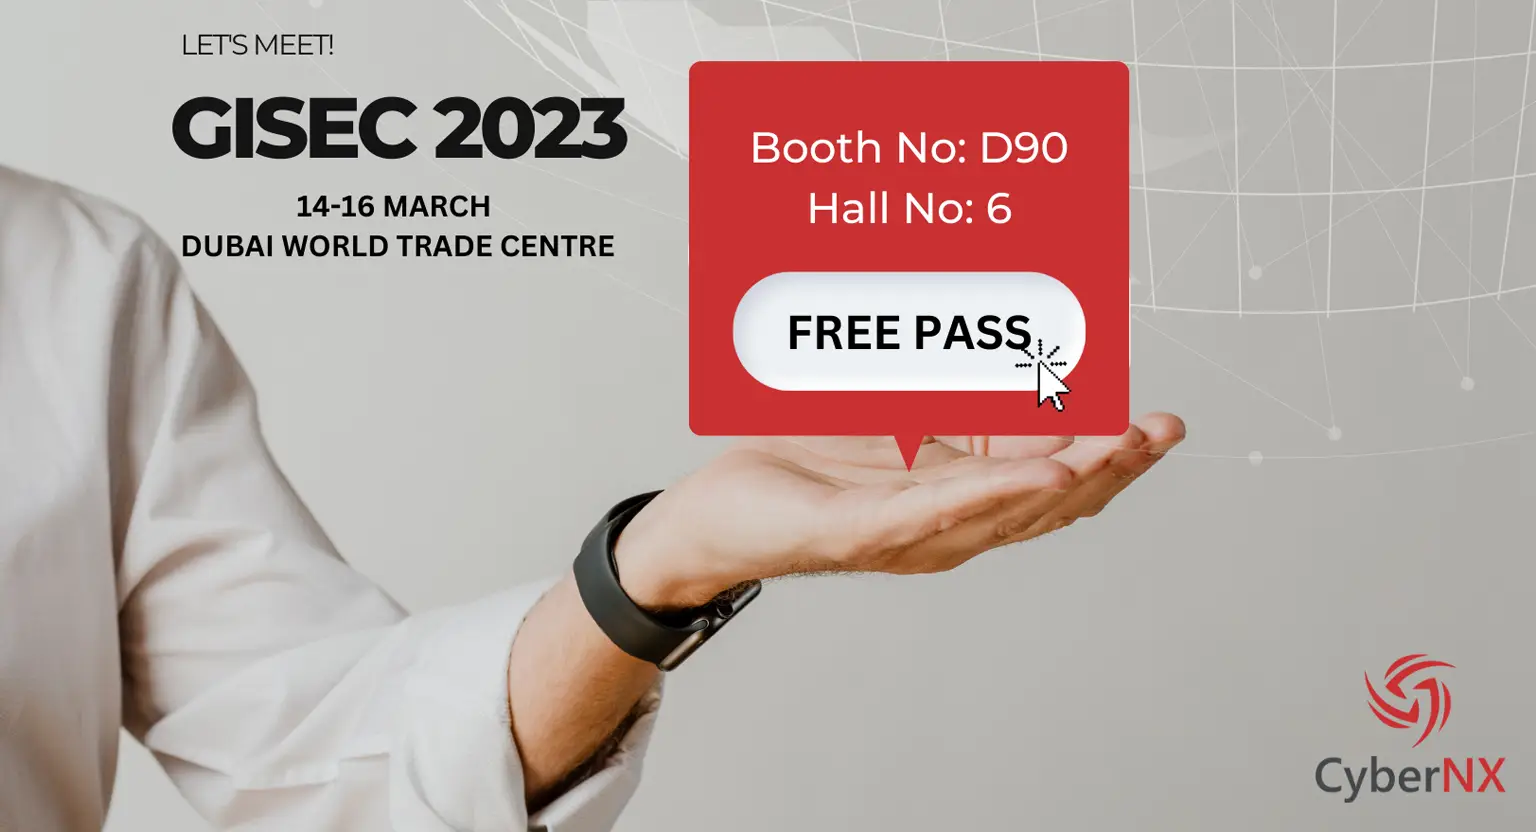 CyberNX Is Participating At GISEC 2023 - Dubai World Trade Center